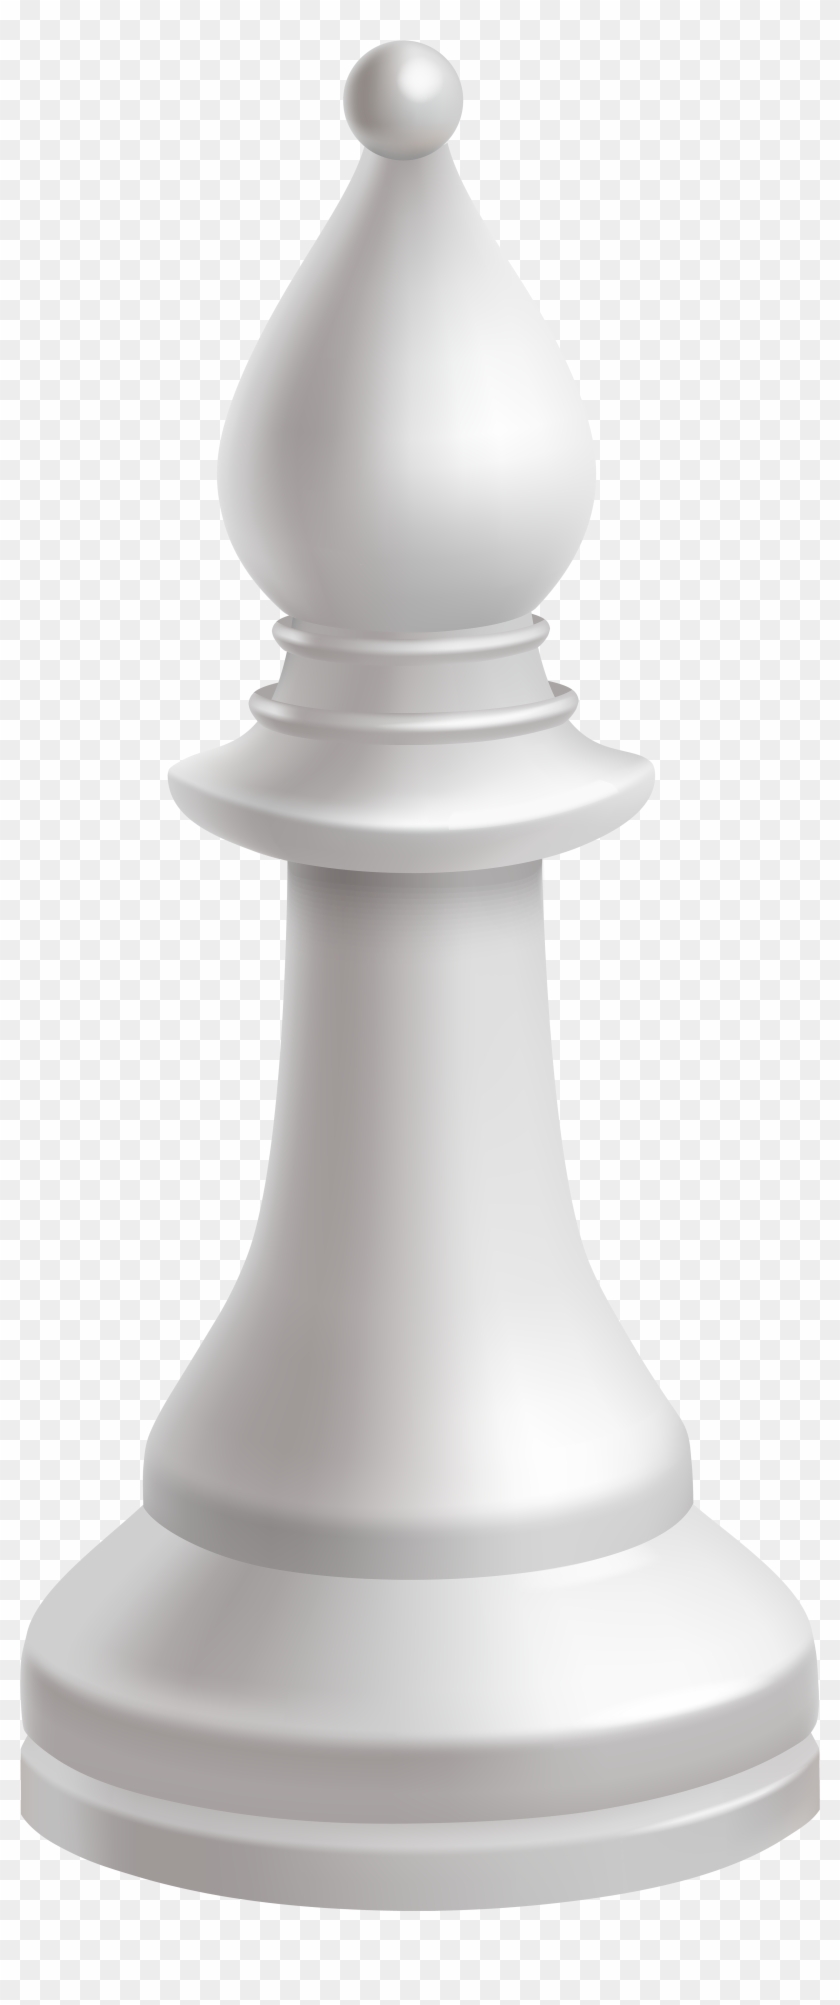 Bishop White Chess Piece Png Clip Art - White King Chess Piece Png Transparent Png